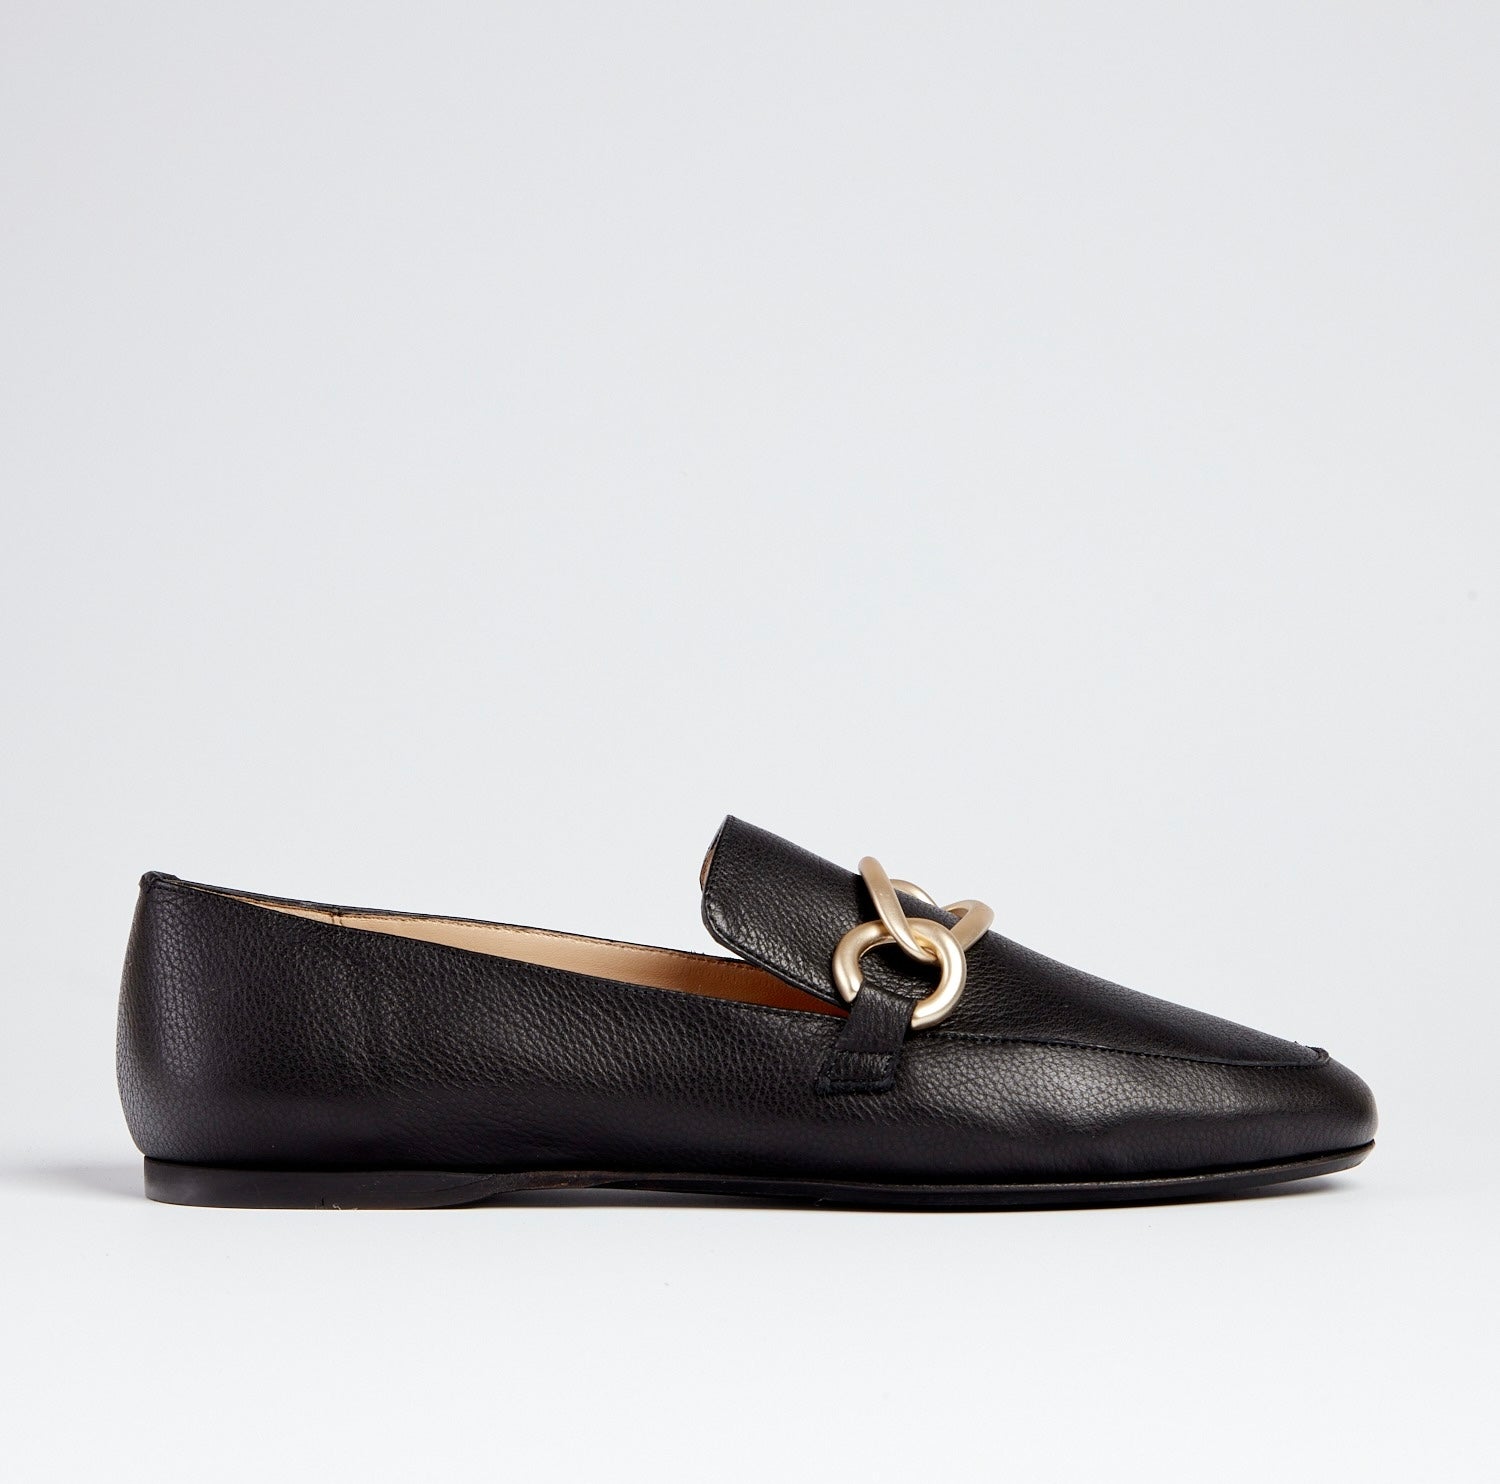 Lily black leather loafers